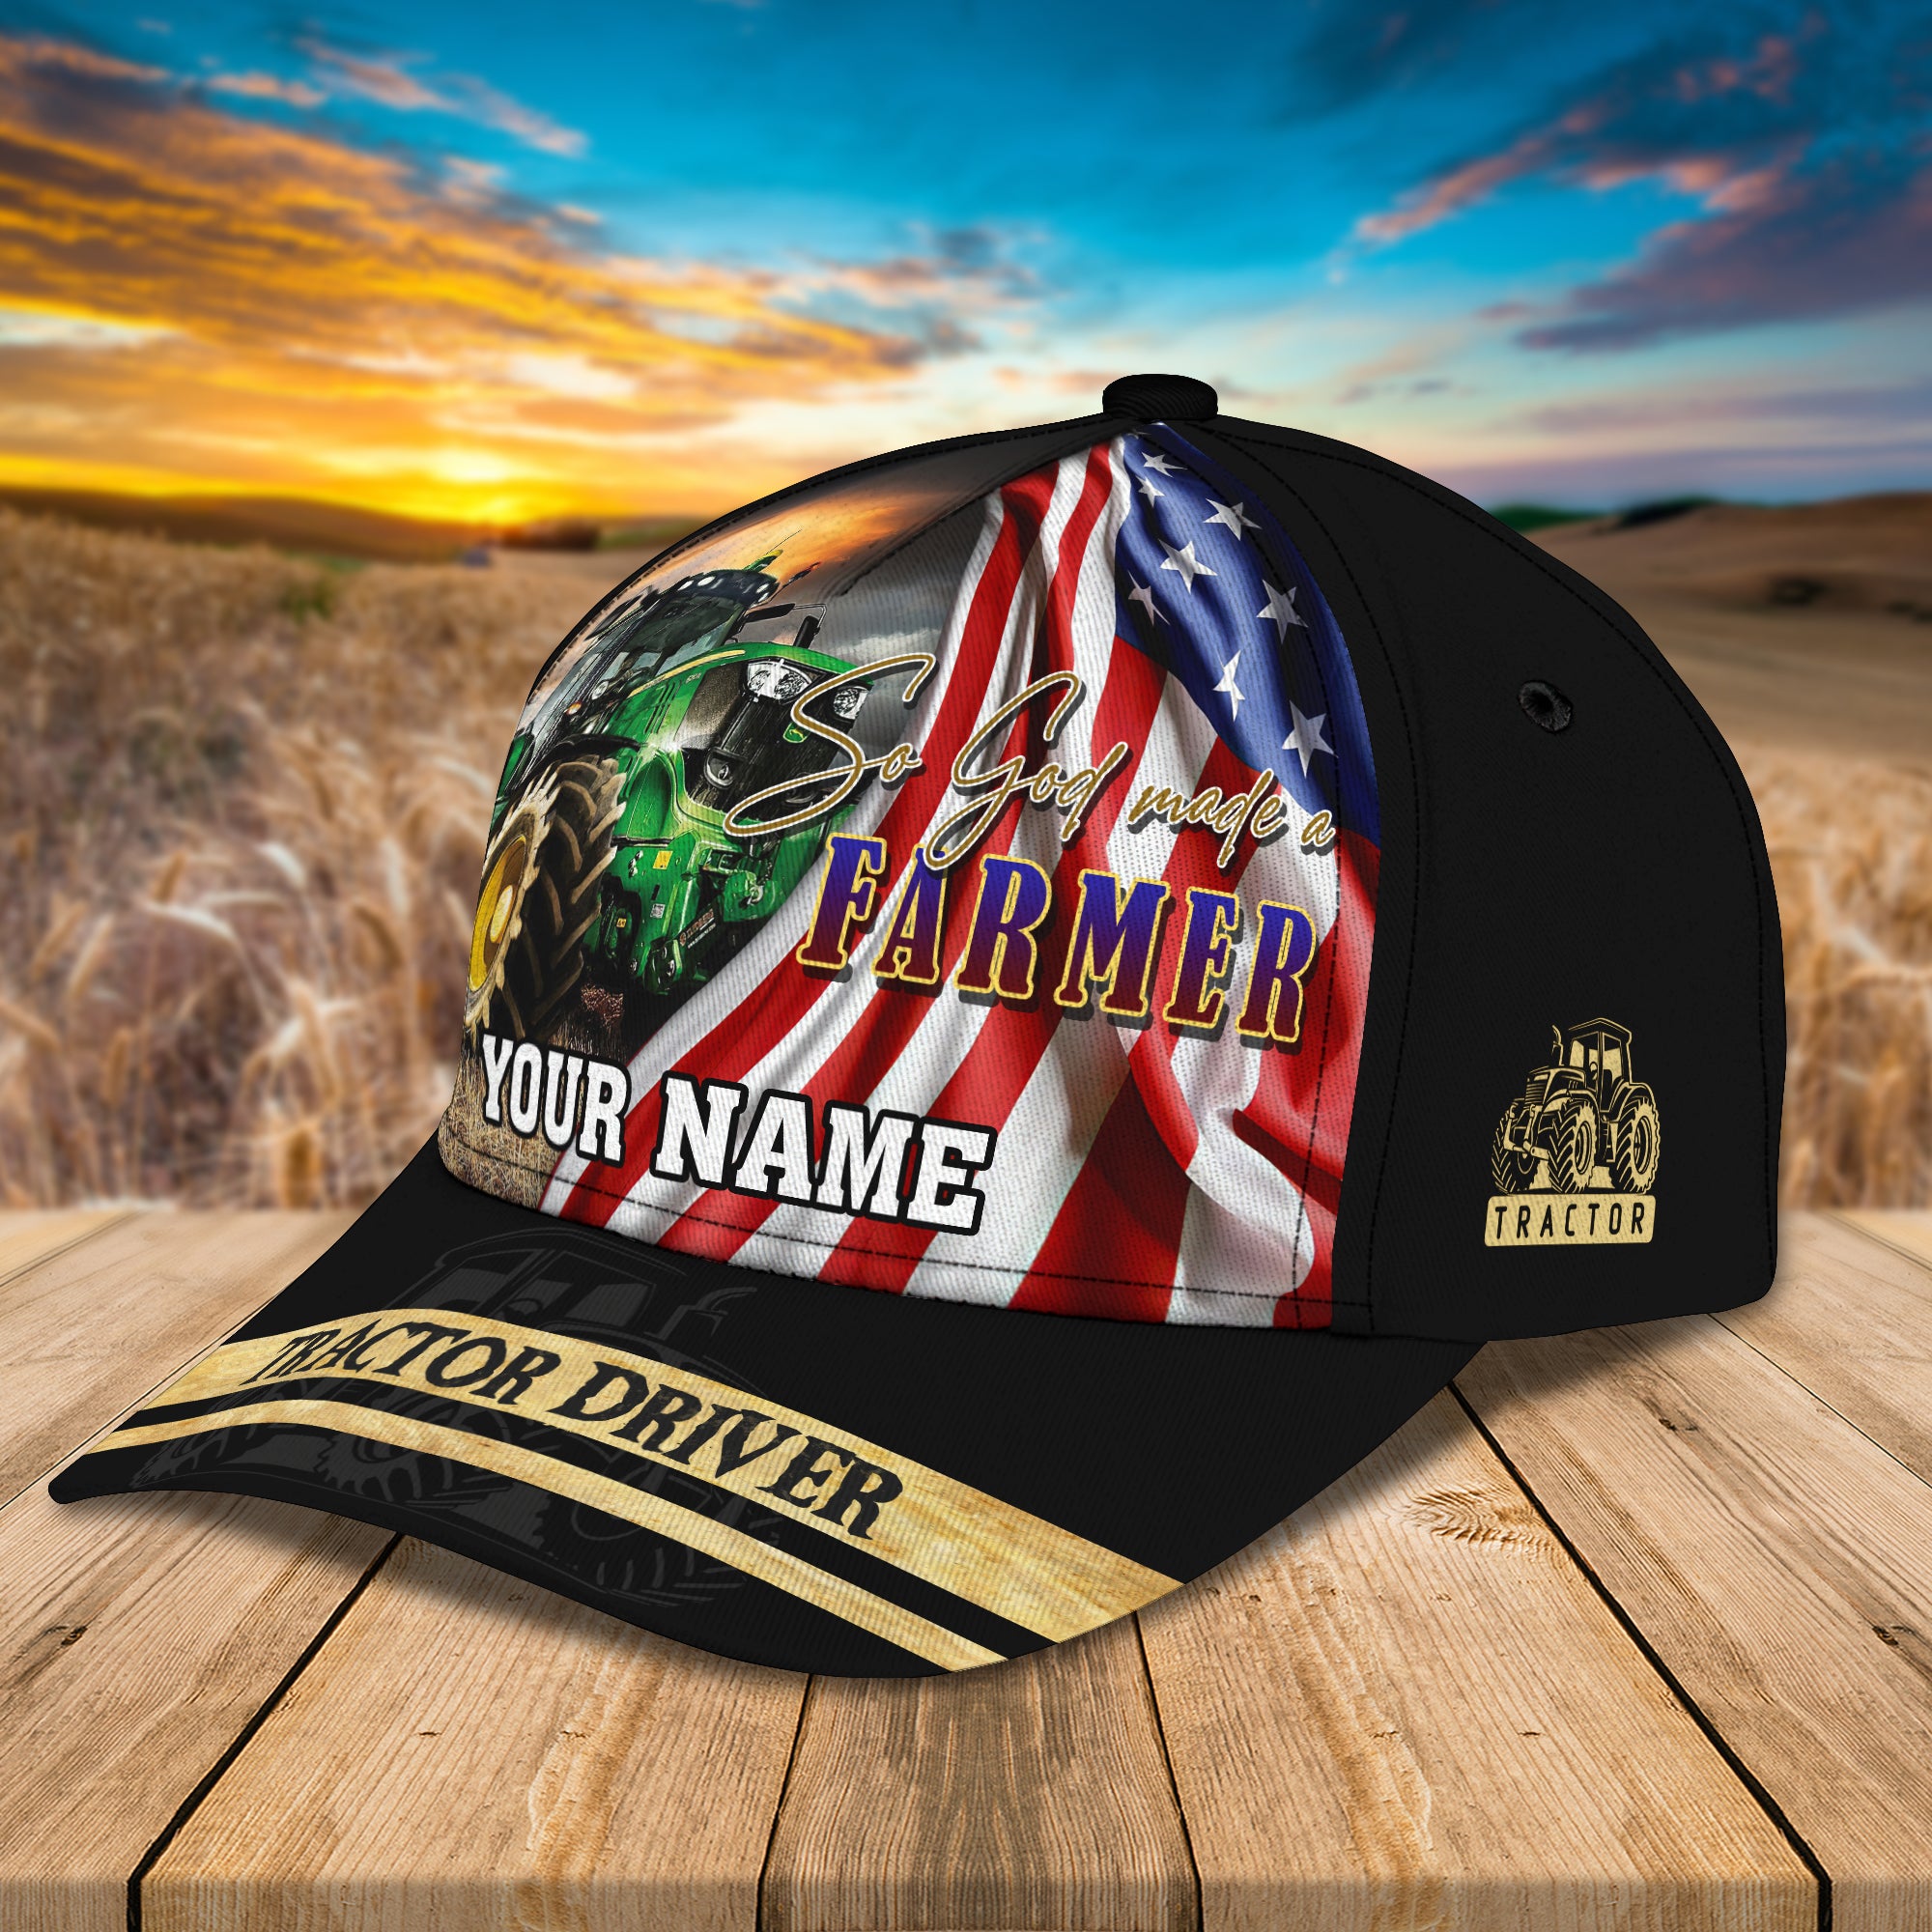 Tractor - Personalized Name Cap - Nia94